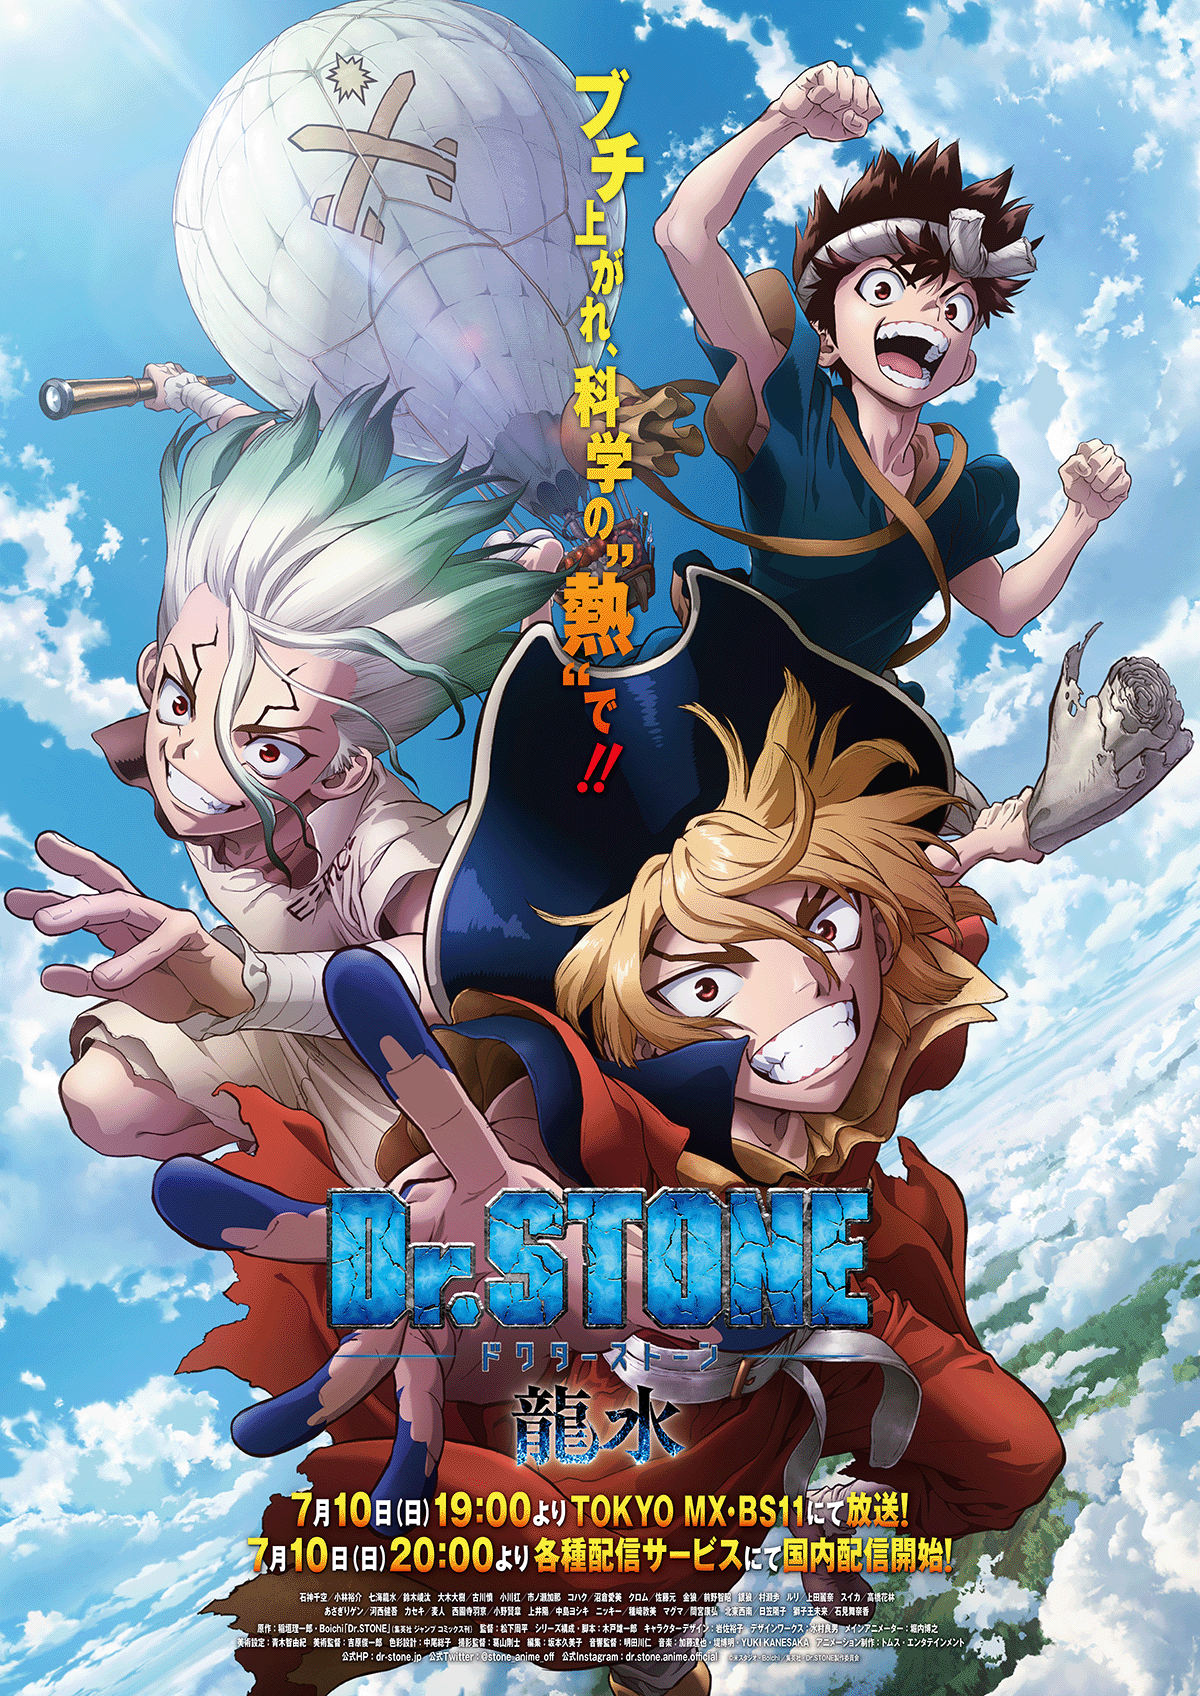 Dr. STONE Special Episode – RYUSUI main visual